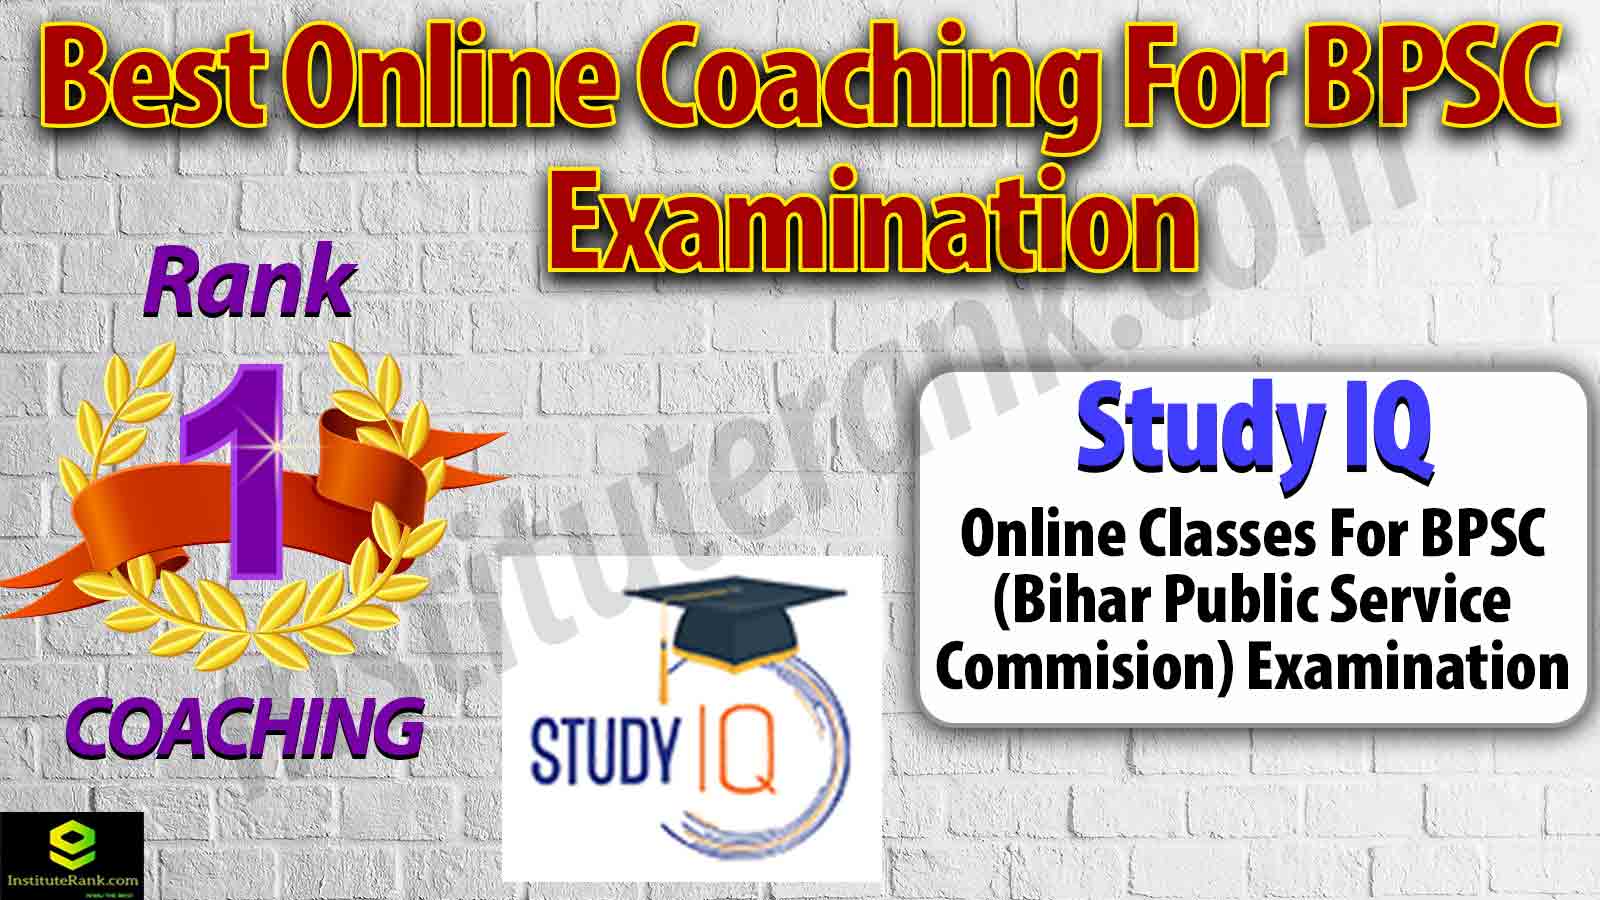 Best Online Coaching for BPSC Examination